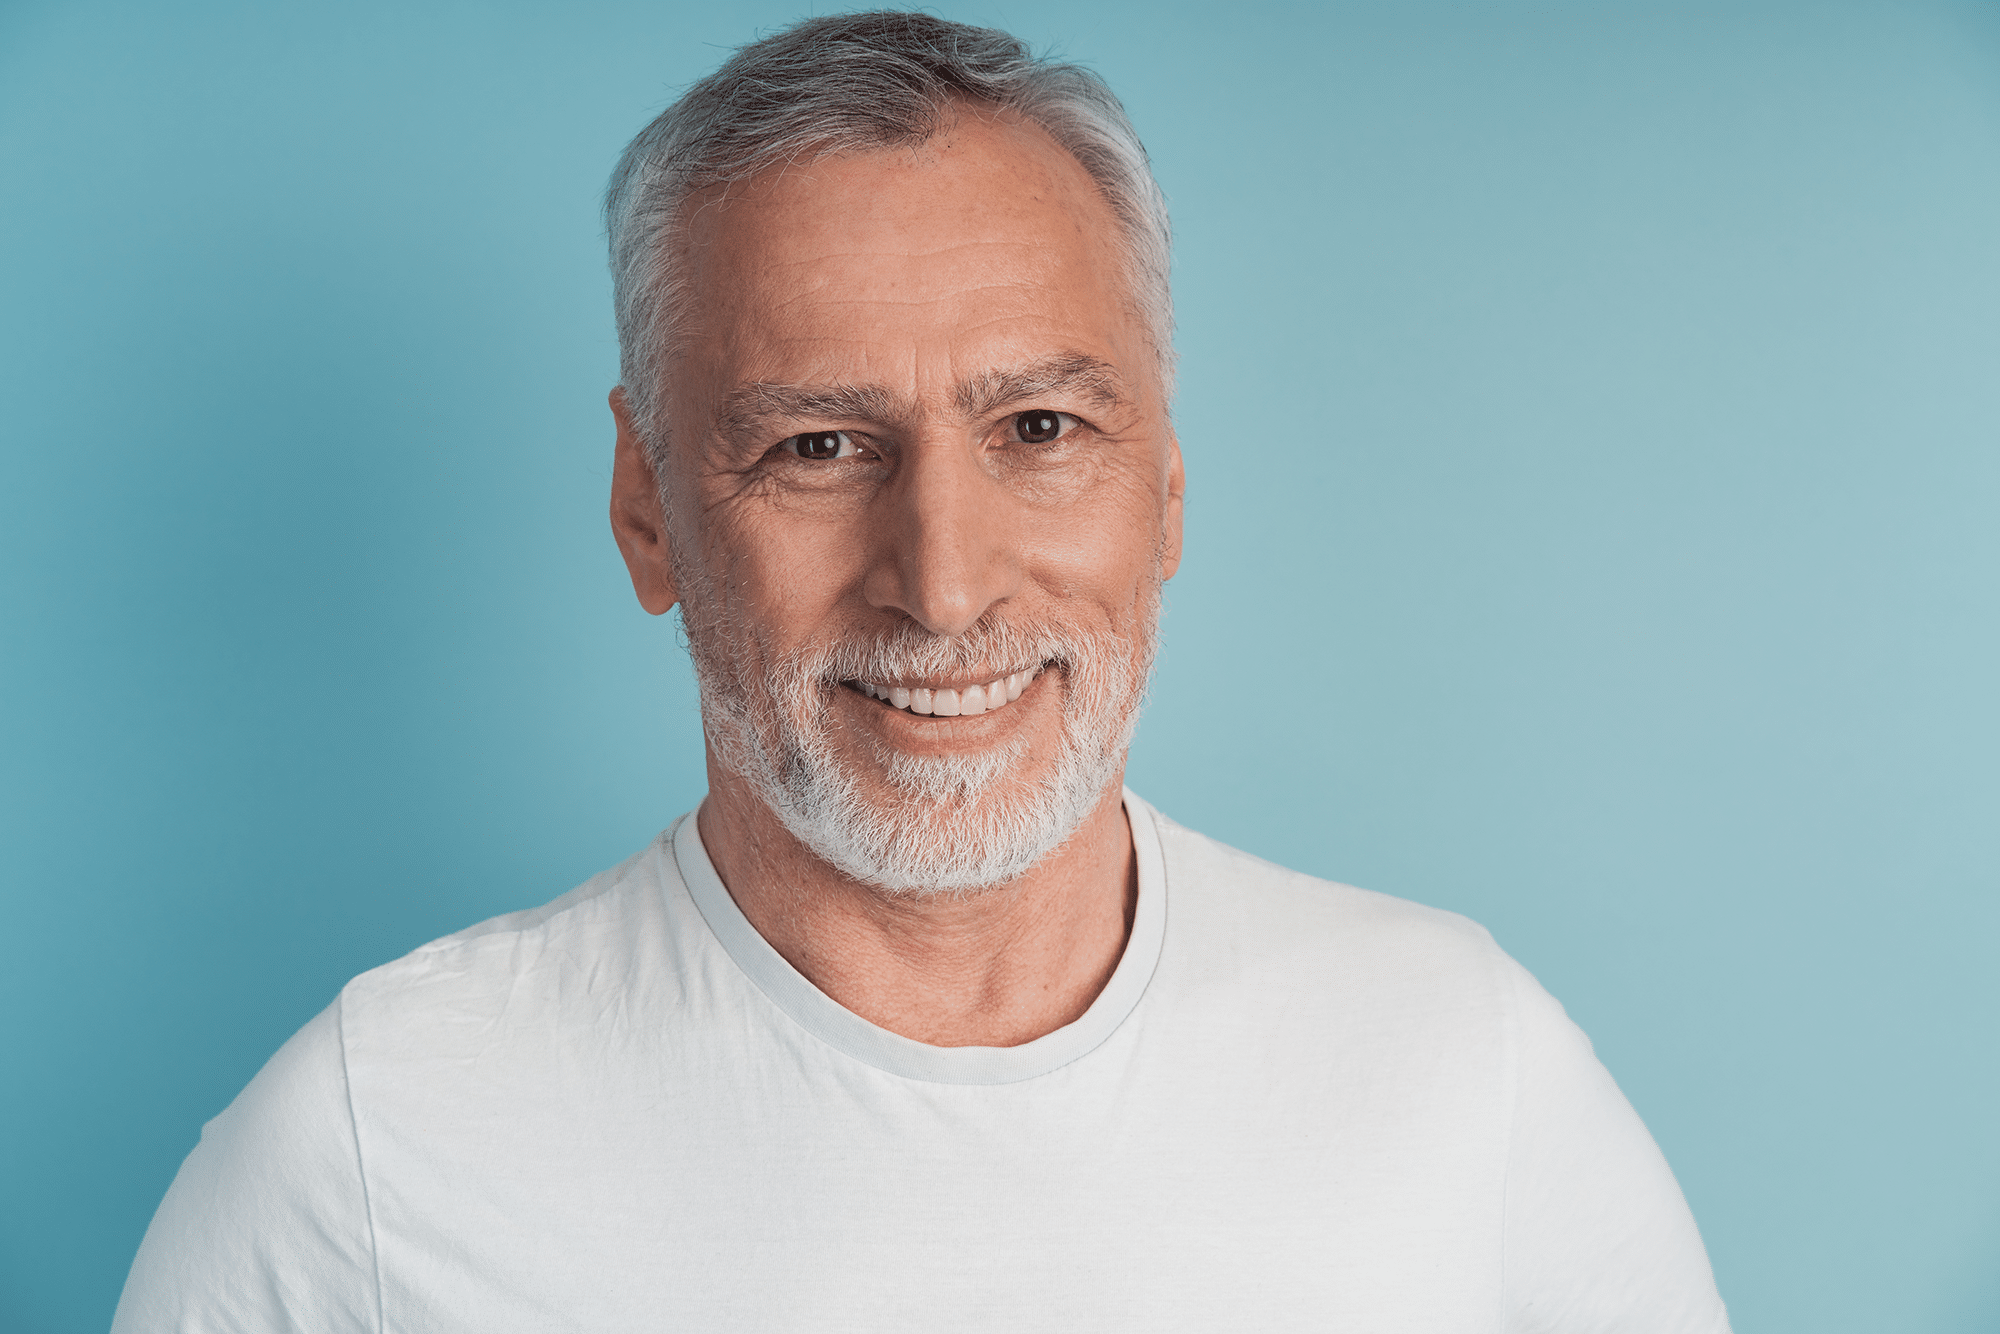 The Top 5 Benefits of Dental Implants and Why They're Worth the Investment Dental Implants in Allen, TX. CFD. General, Cosmetic, Restorative, Preventative, Family Dentistry in Allen, TX 75002 Call:972-727-4468 Porcelain Veneers Dr. Nicholas Cox Dr. David Toney Cox Family Dentistry General, Cosmetic, Restorative, Preventative, Family Dentistry in Allen, TX 75002